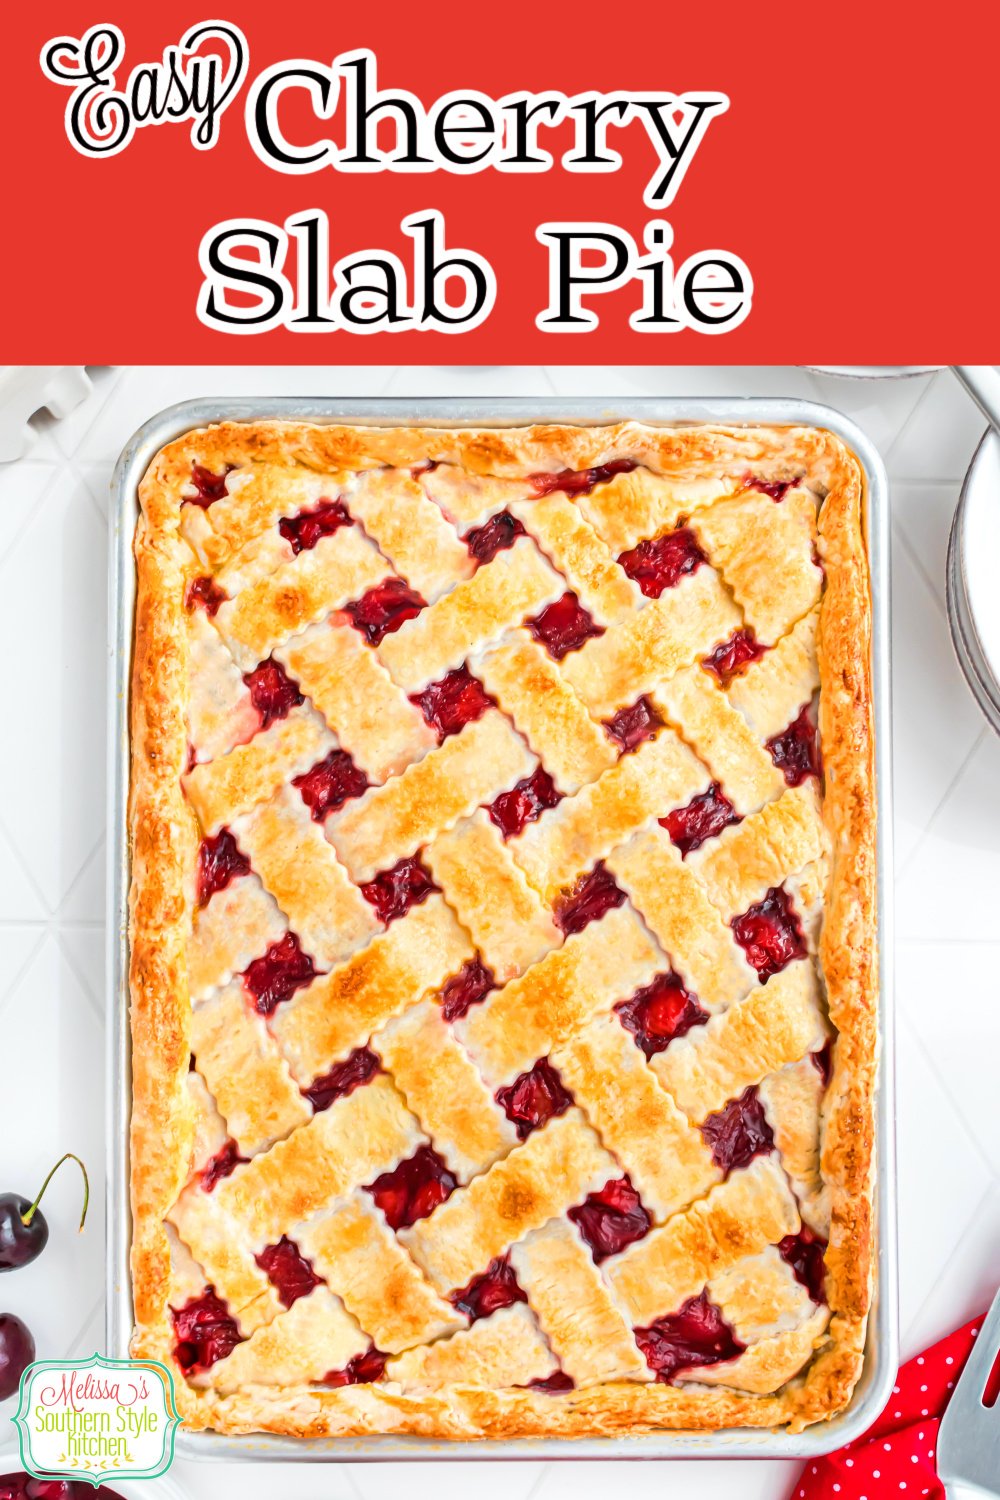 This Easy Cherry Slab Pie recipe can be served with vanilla ice cream or whipped cream making it ideal for larger gatherings. #cherrypie #cherryslabpie #slabpierecipes #memorialdayrecipes #july4th #july4threcipes #easydesserts #bestcherrypie #southernrecipes